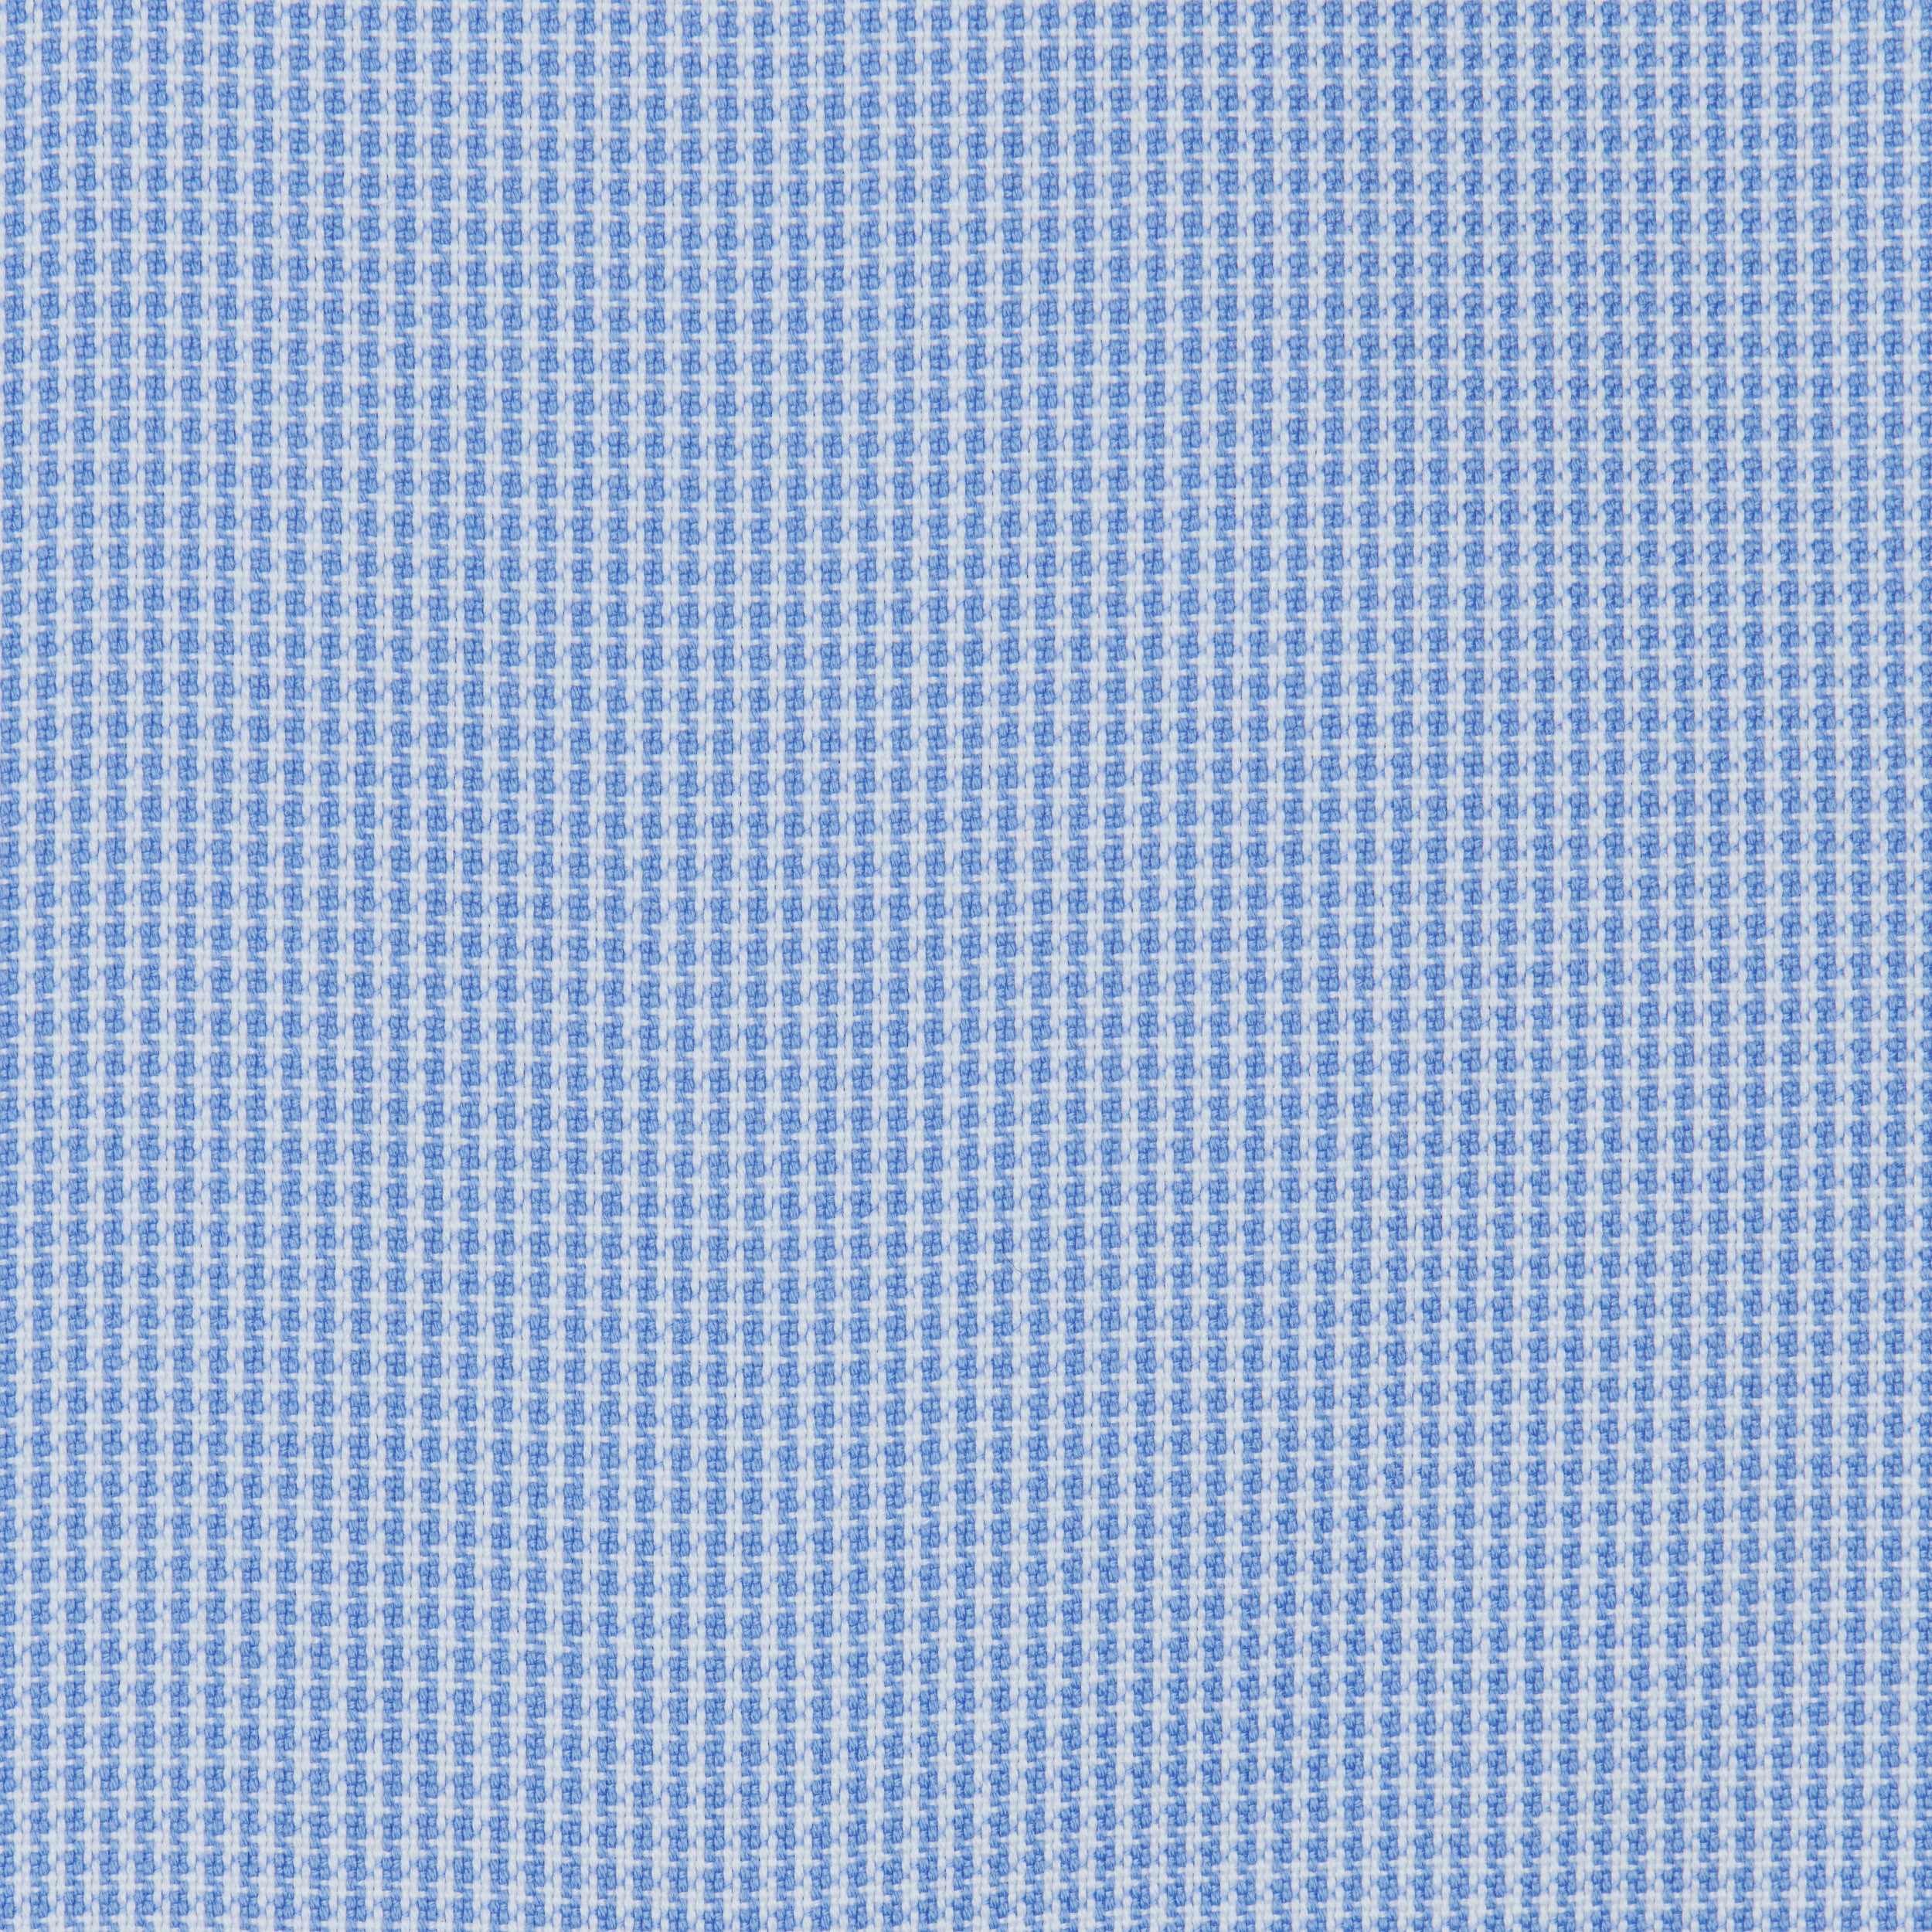 051 TF BD - Blue Houndstooth Tailored Fit Button Down Collar